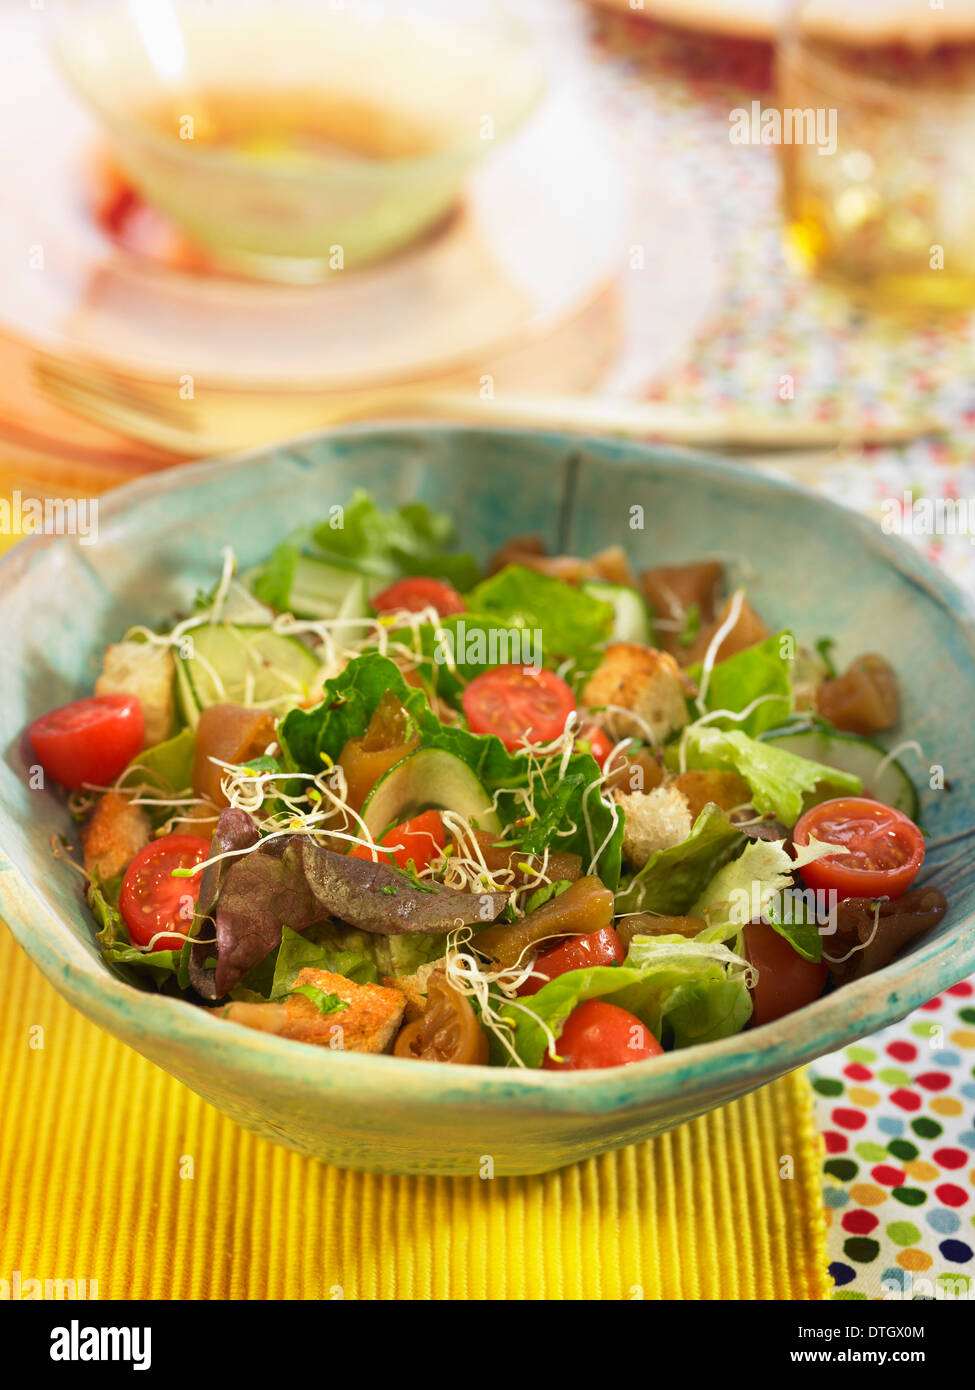 Cochayuyo seaweed,lettuce,cherry tomato,cucumber and luzerne sprout salad with croutons Stock Photo